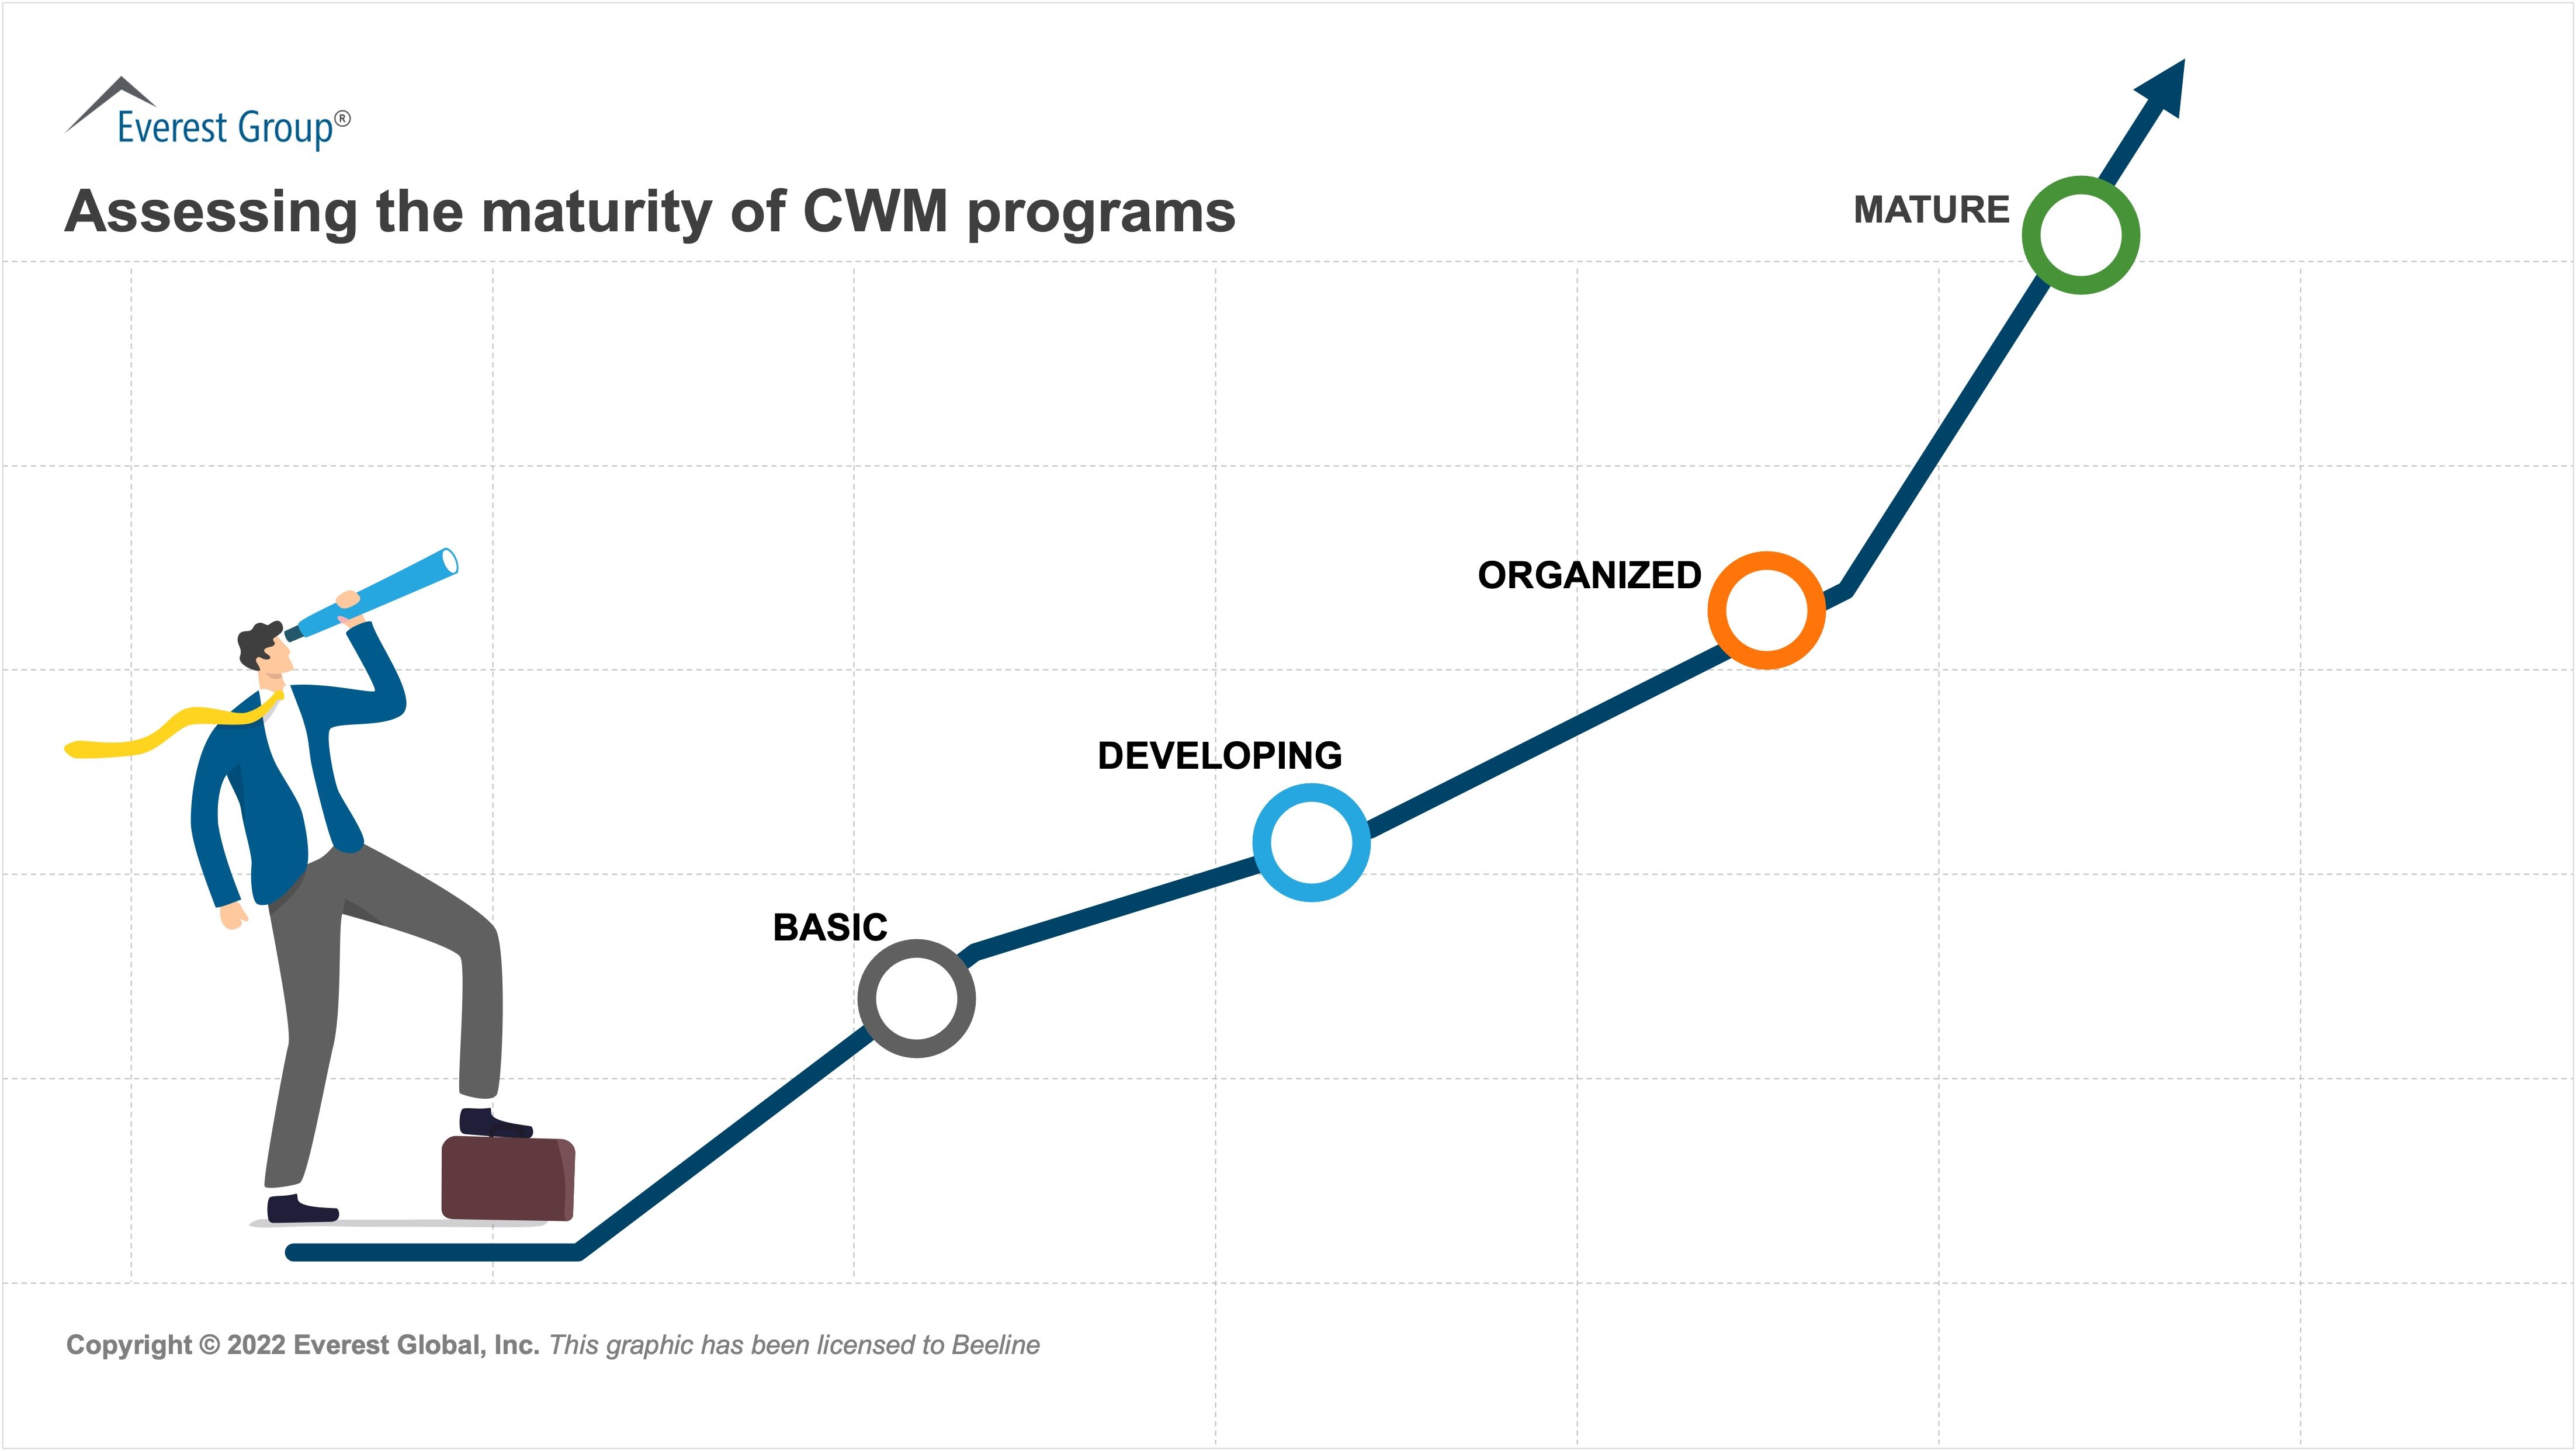 Assessing the maturity of CWM programs - part 1